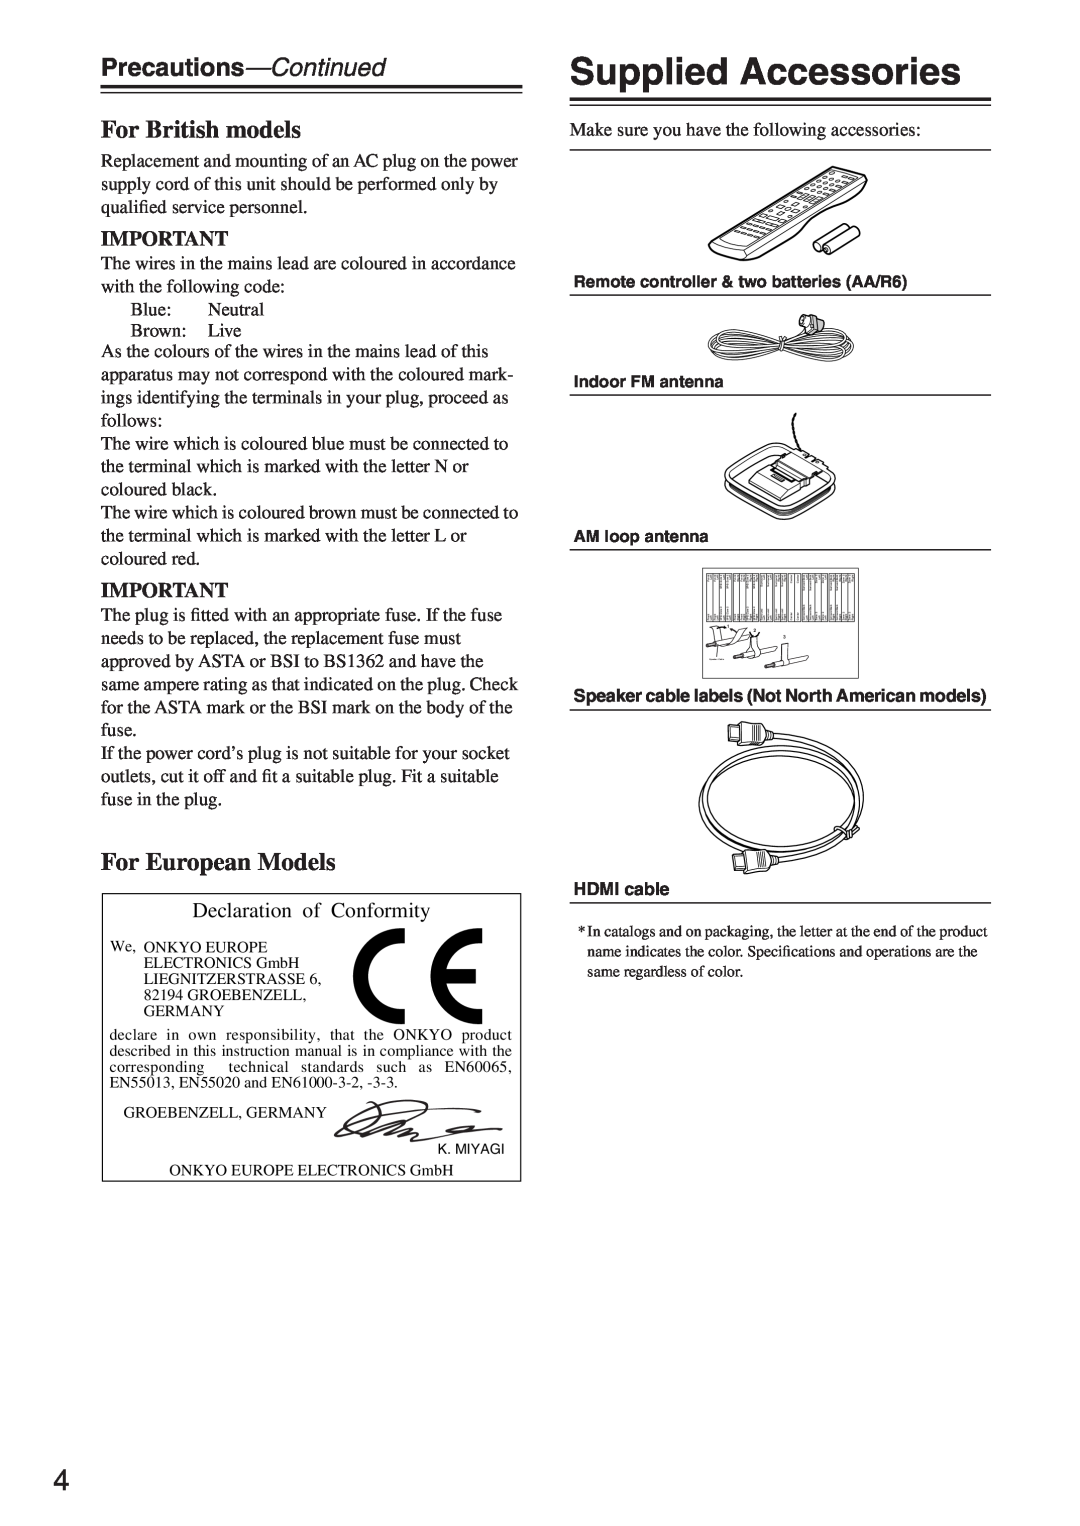 Onkyo HT-R640 instruction manual Supplied Accessories, Precautions-Continued, For British models, For European Models 